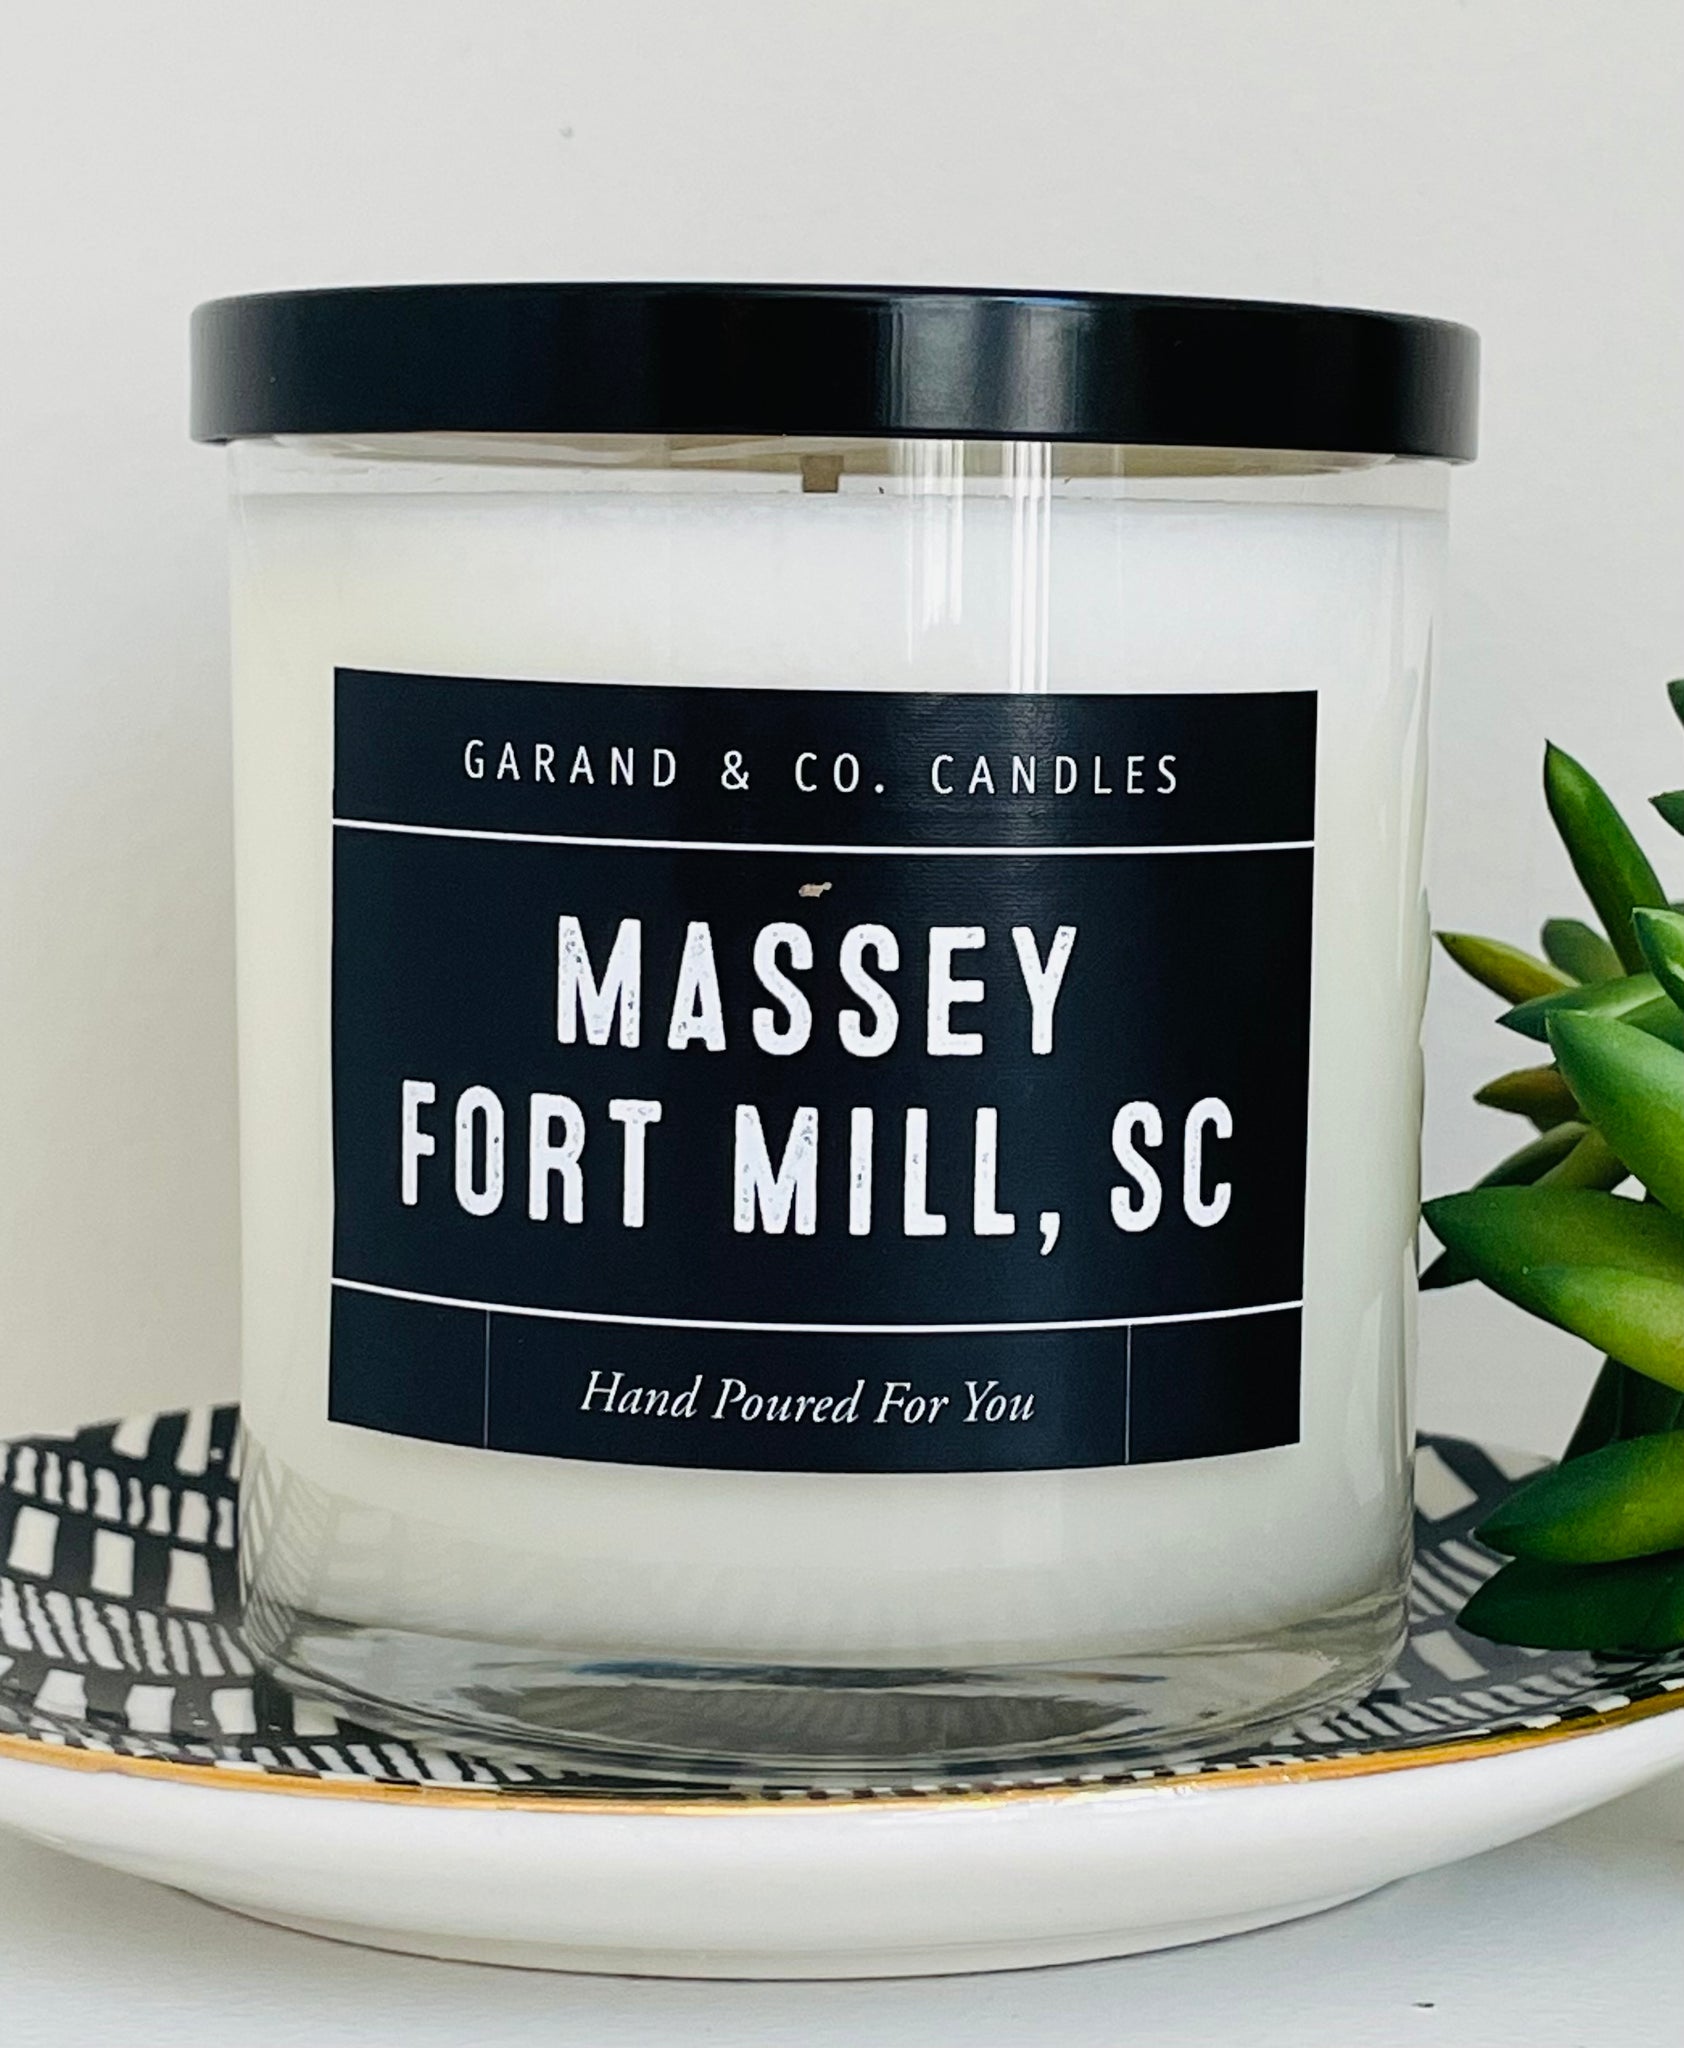 12 oz Clear Glass Jar Candle - Massey Fort Mill, SC